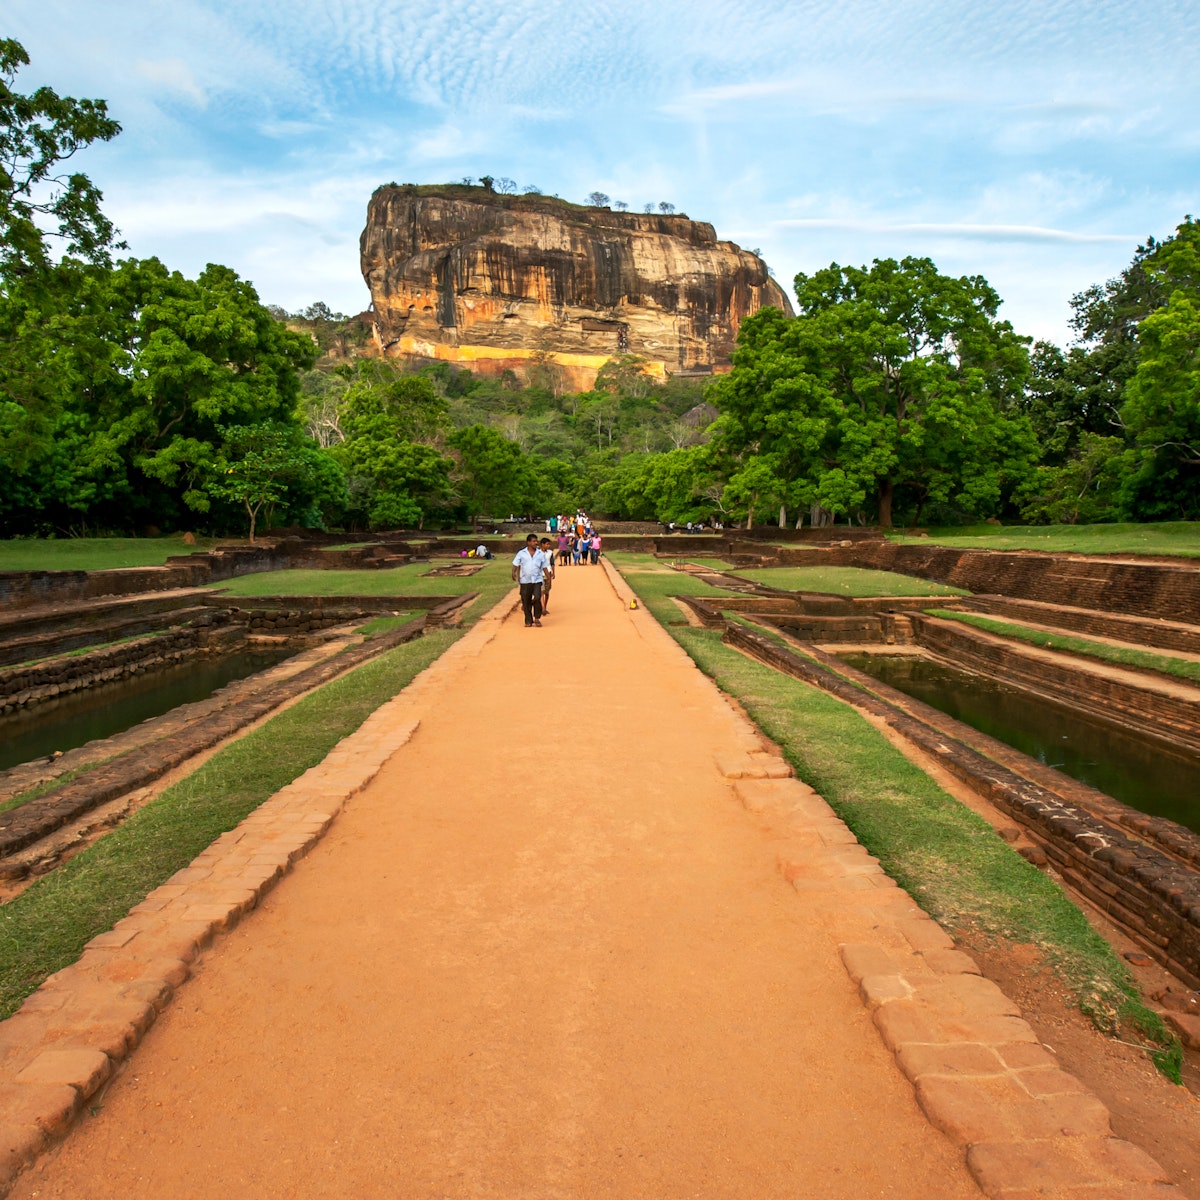 View from the ancient Royal Gardens towards Sigiriya Rock, also known as the Lion Rock Fortress. The gardens date from King Kassapa between AD 477 and 485.